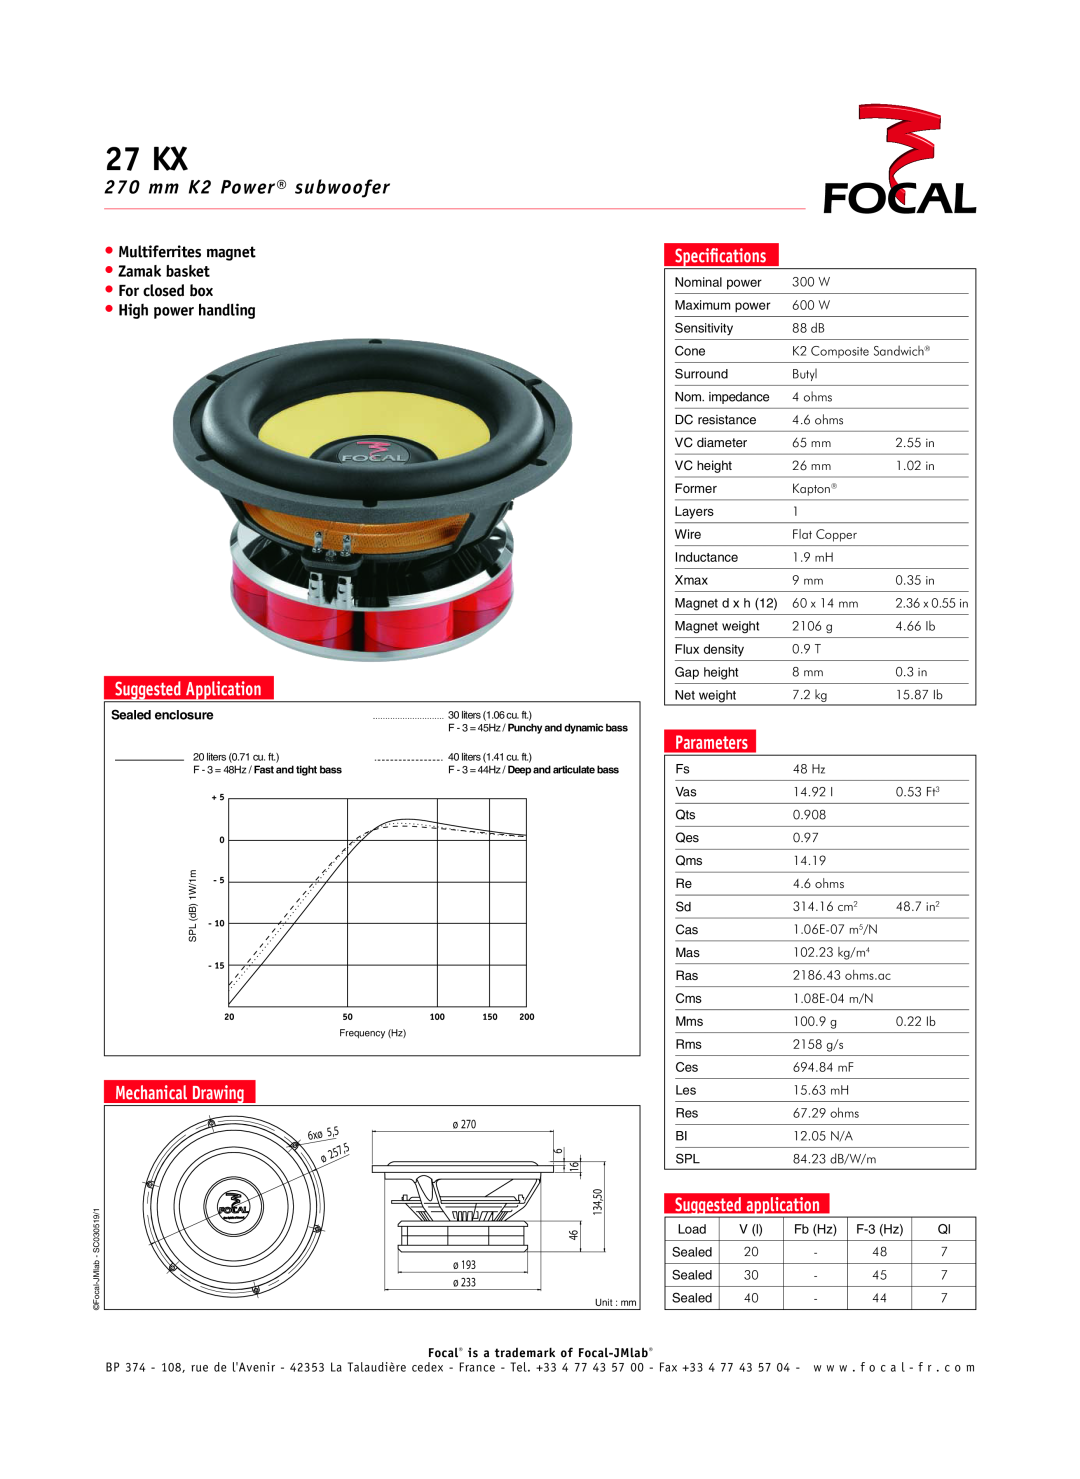 Focal 27 KX specifications mm K2 Power subwoofer, Suggested Application, Mechanical Drawing, Speciﬁcations, Parameters 